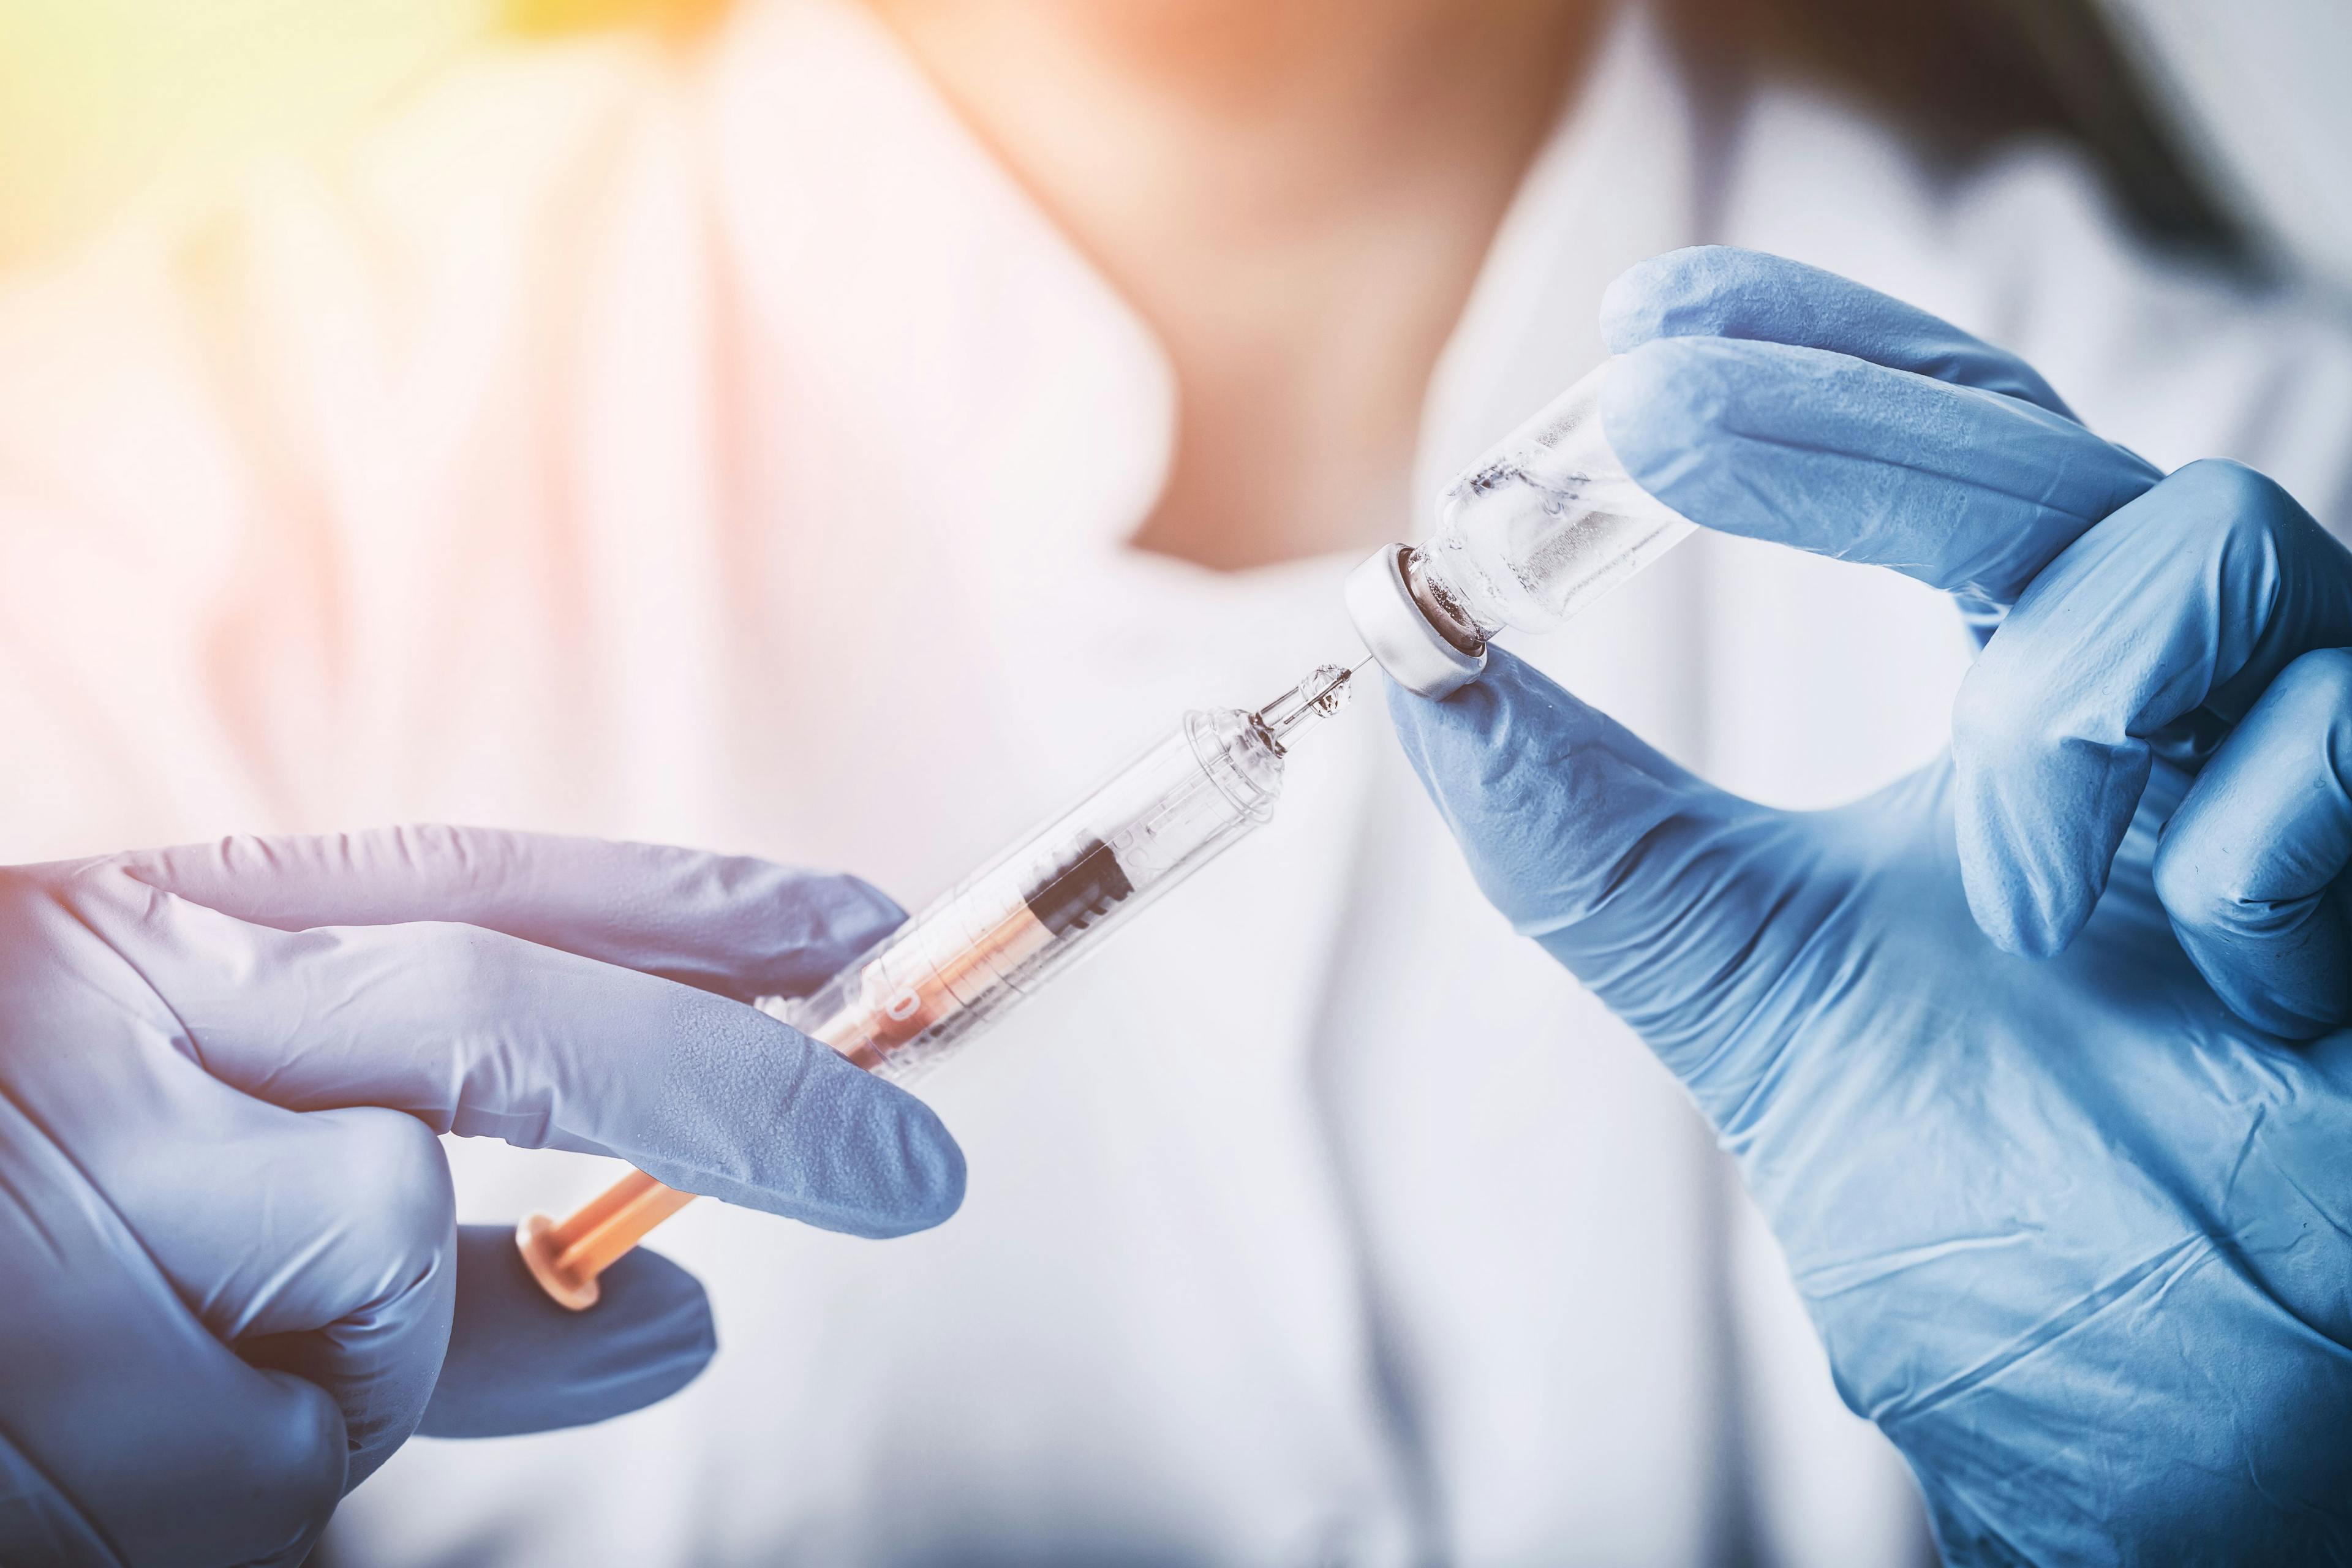 Non-Live Recombinant Vaccine for Herpes Zoster Shows Greater Efficacy, Broader Applicability Than Live Attenuated Vaccine